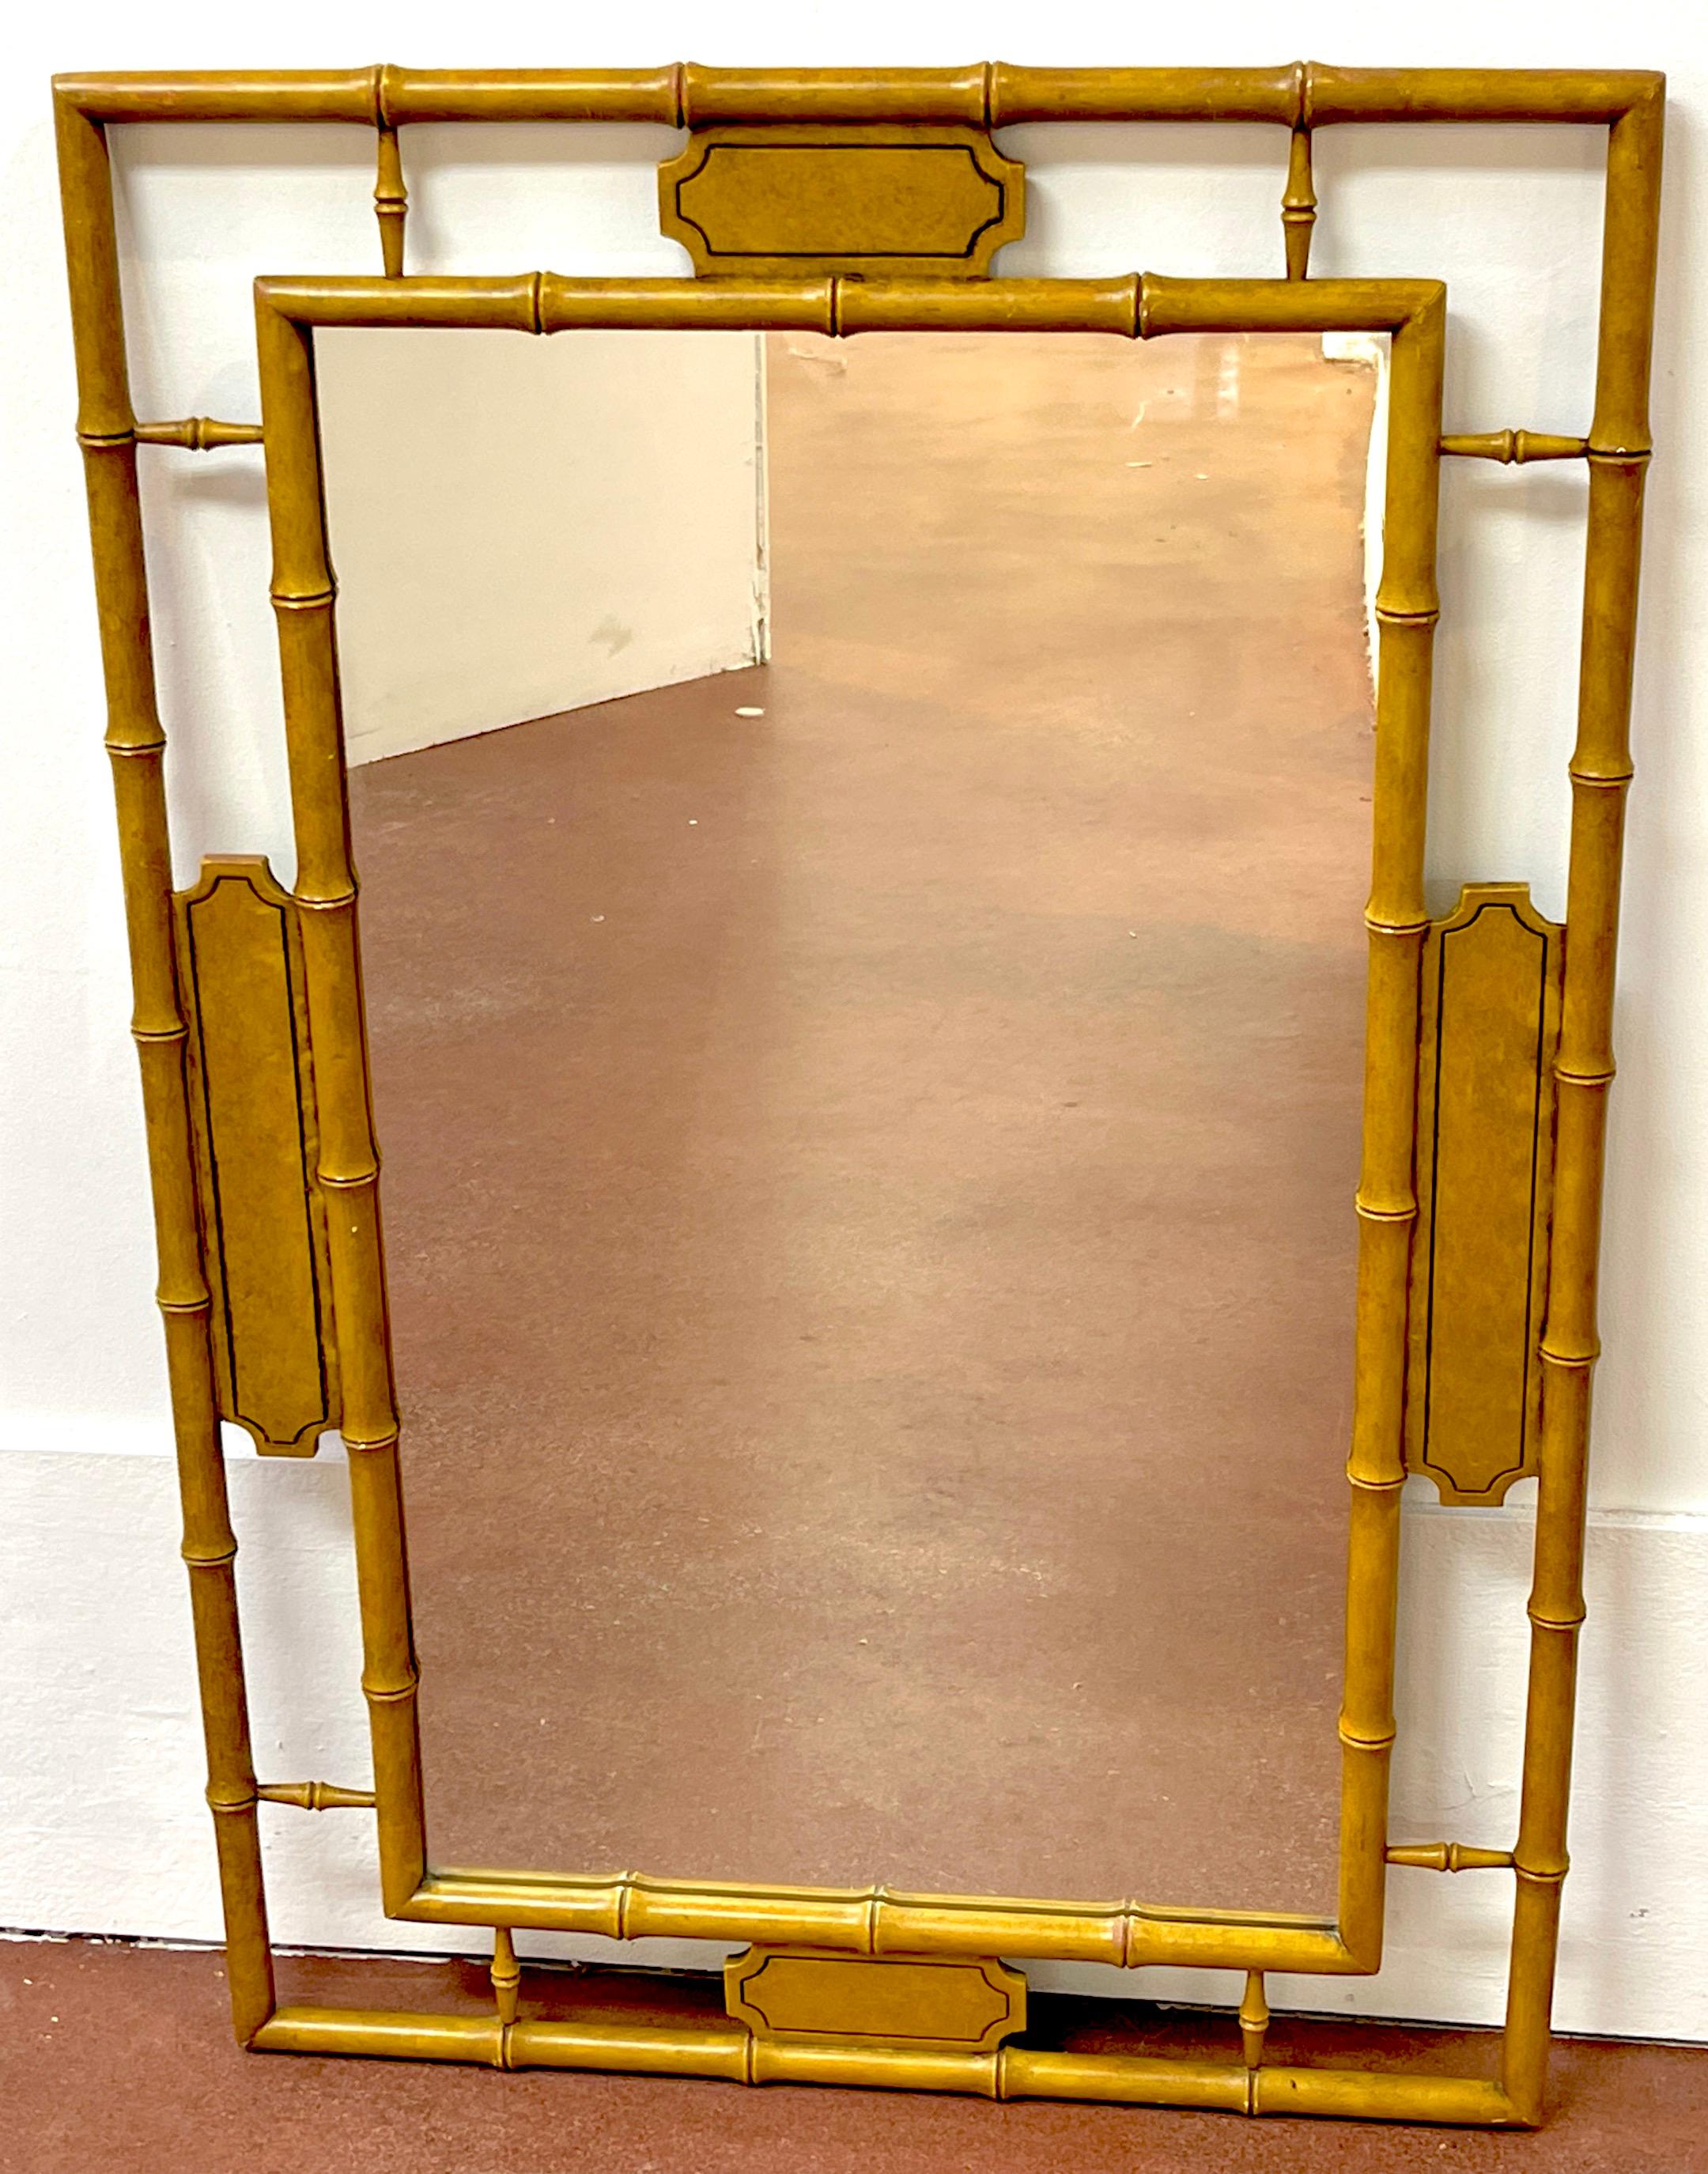 English Regency Style Faux Bamboo Saddle Lacquer Mirror 
England, 20th century 
A beautiful 20th-century English Regency Style Faux Bamboo Saddle Lacquer Mirror is a stunning addition to any interior. Measuring 28 inches in width and 43 inches in